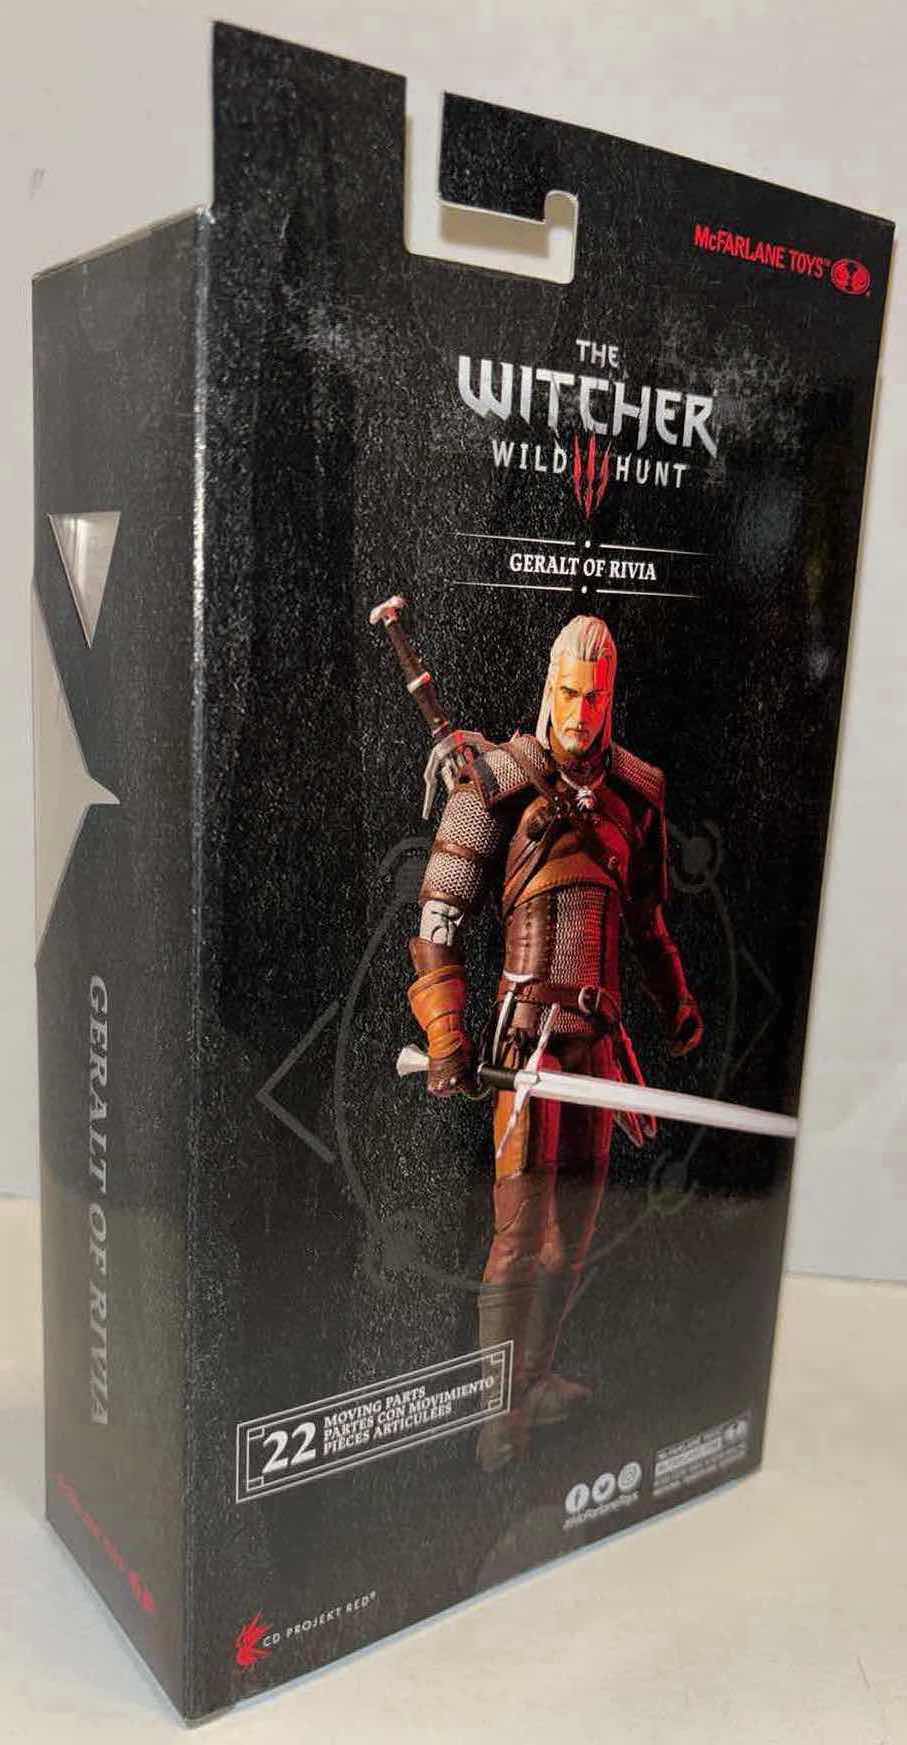 Photo 4 of NEW MCFARLANE TOYS THE WITCHER WILD HUNT 2-PACK “GERALT OF RIVIA” ACTION FIGURE & ACCESSORIES